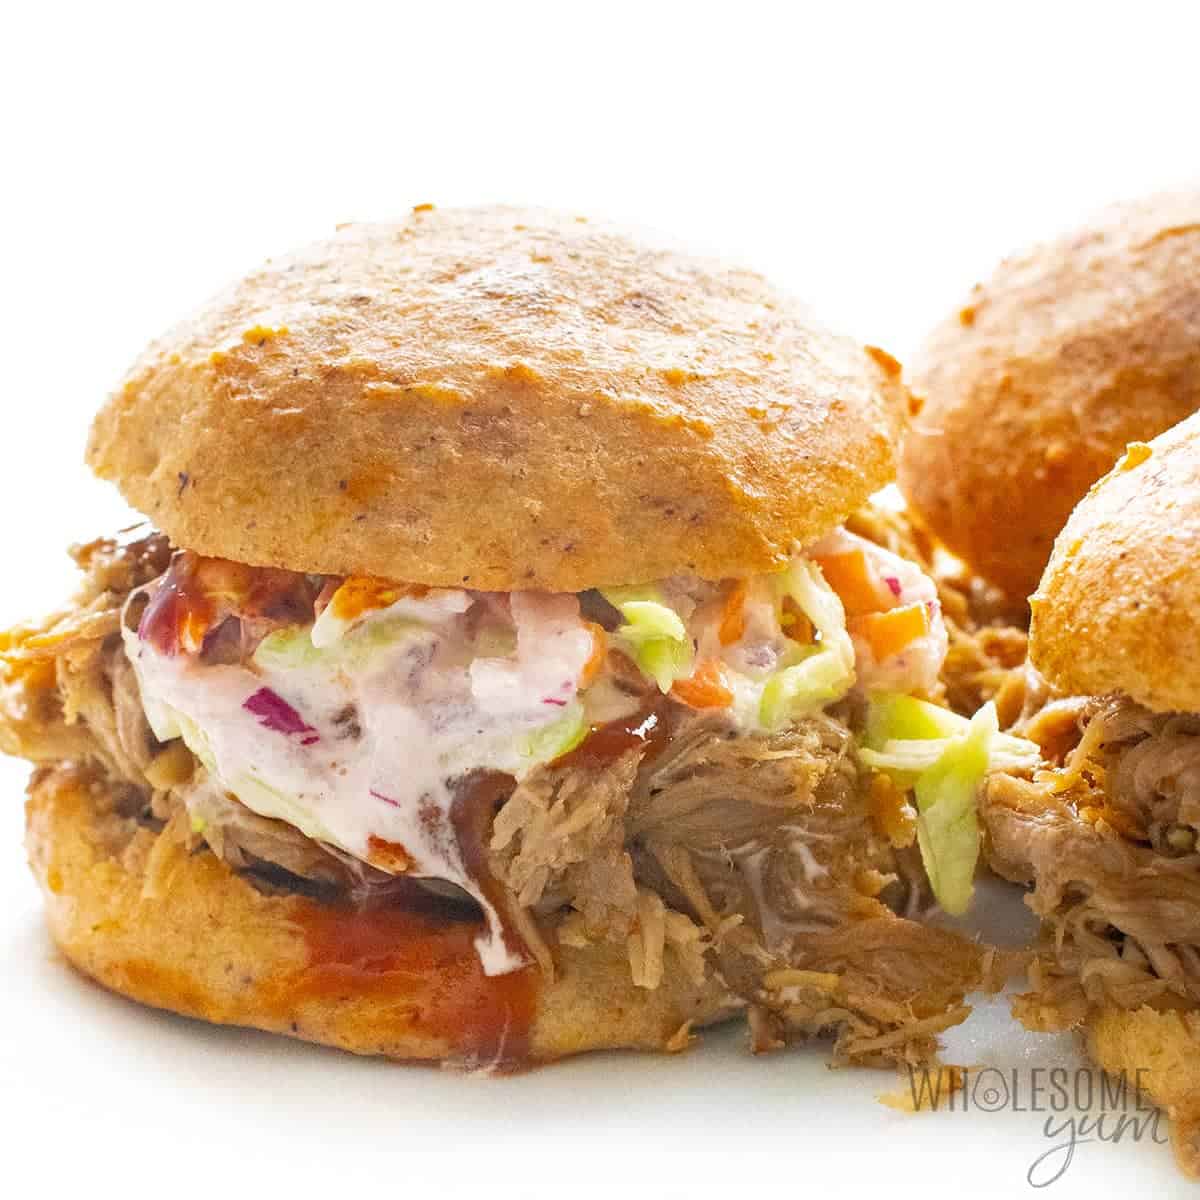 Pulled pork sandwiches on a plate.